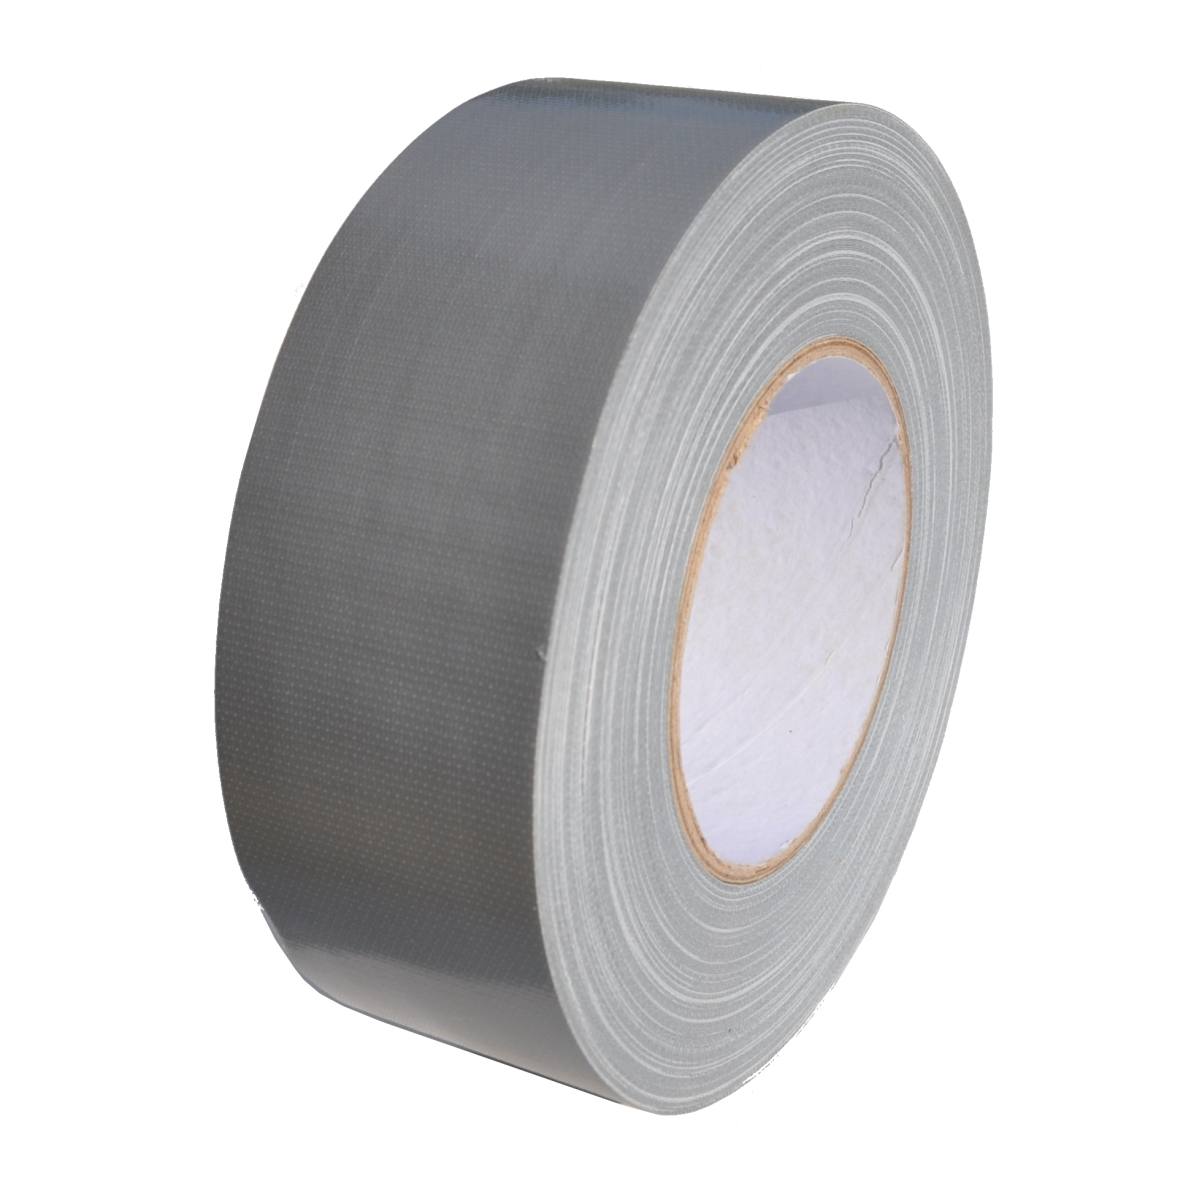 S-K-S 990 fabric tape 75mmx50m silver